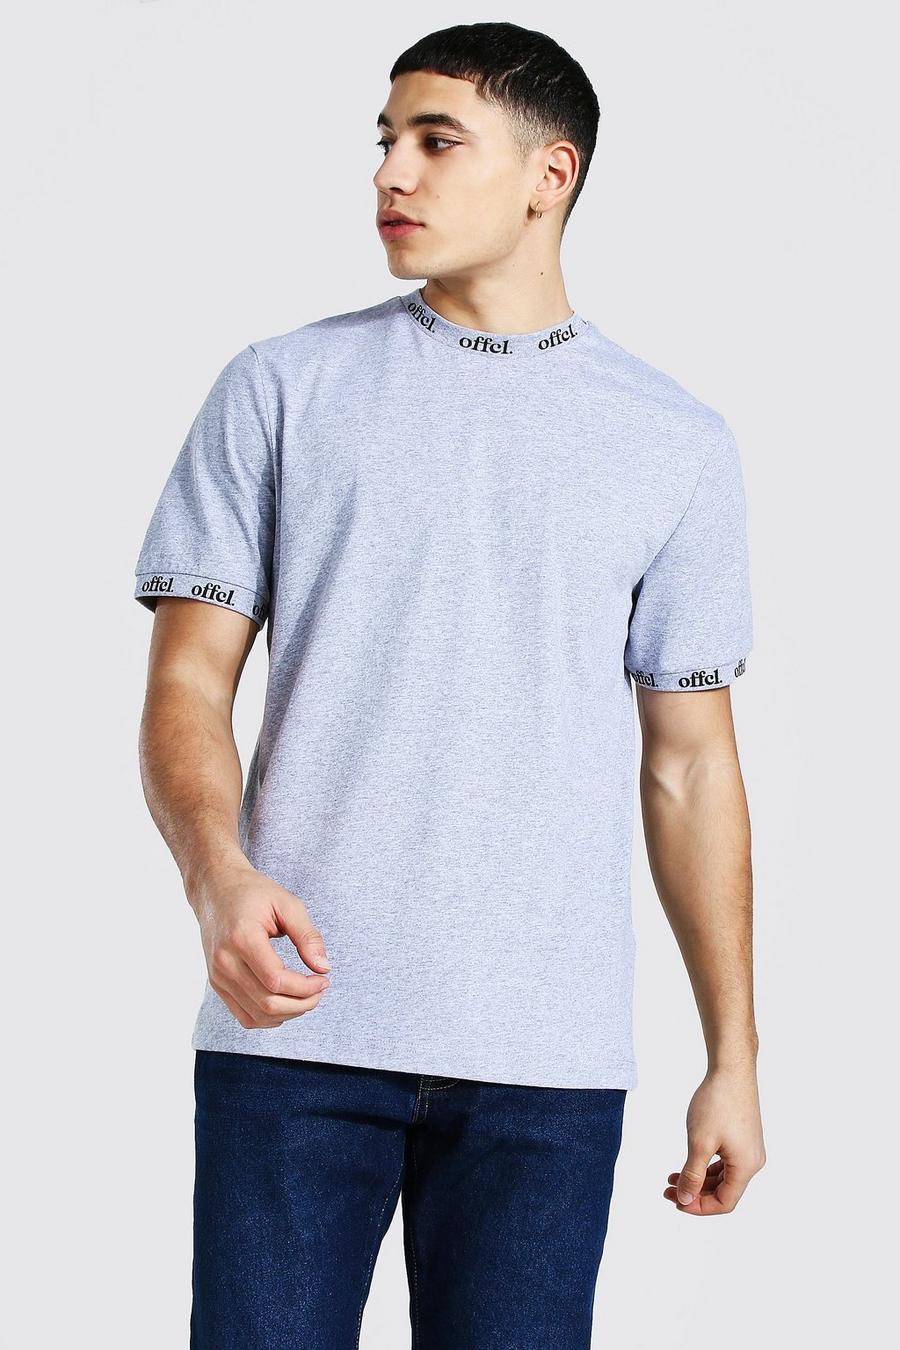 Grey marl Offcl Neck And Cuff Graphic T-Shirt image number 1